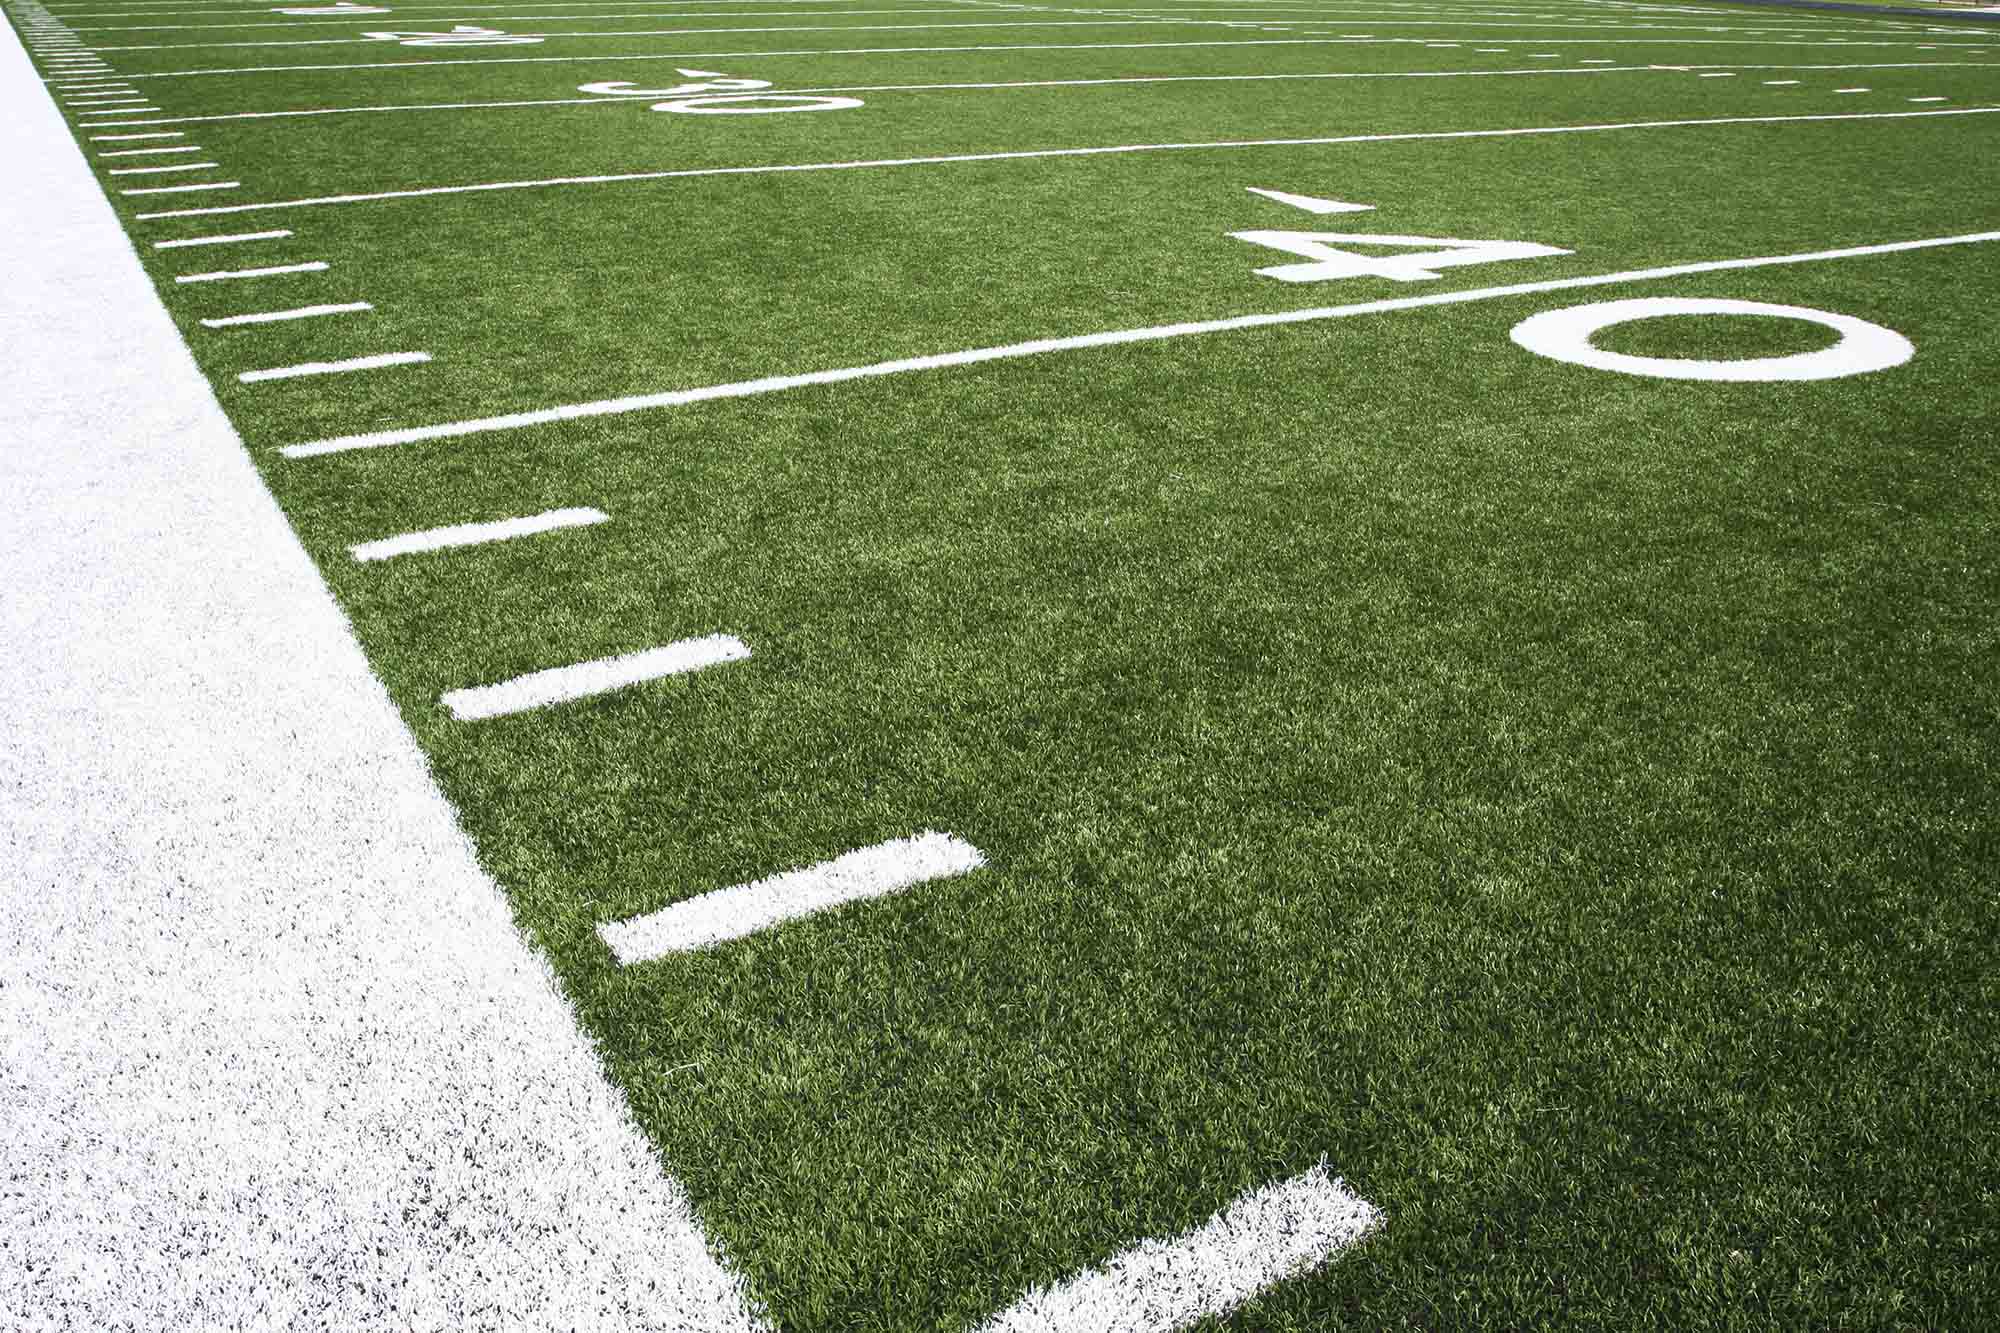 Close up of the 40 yard line